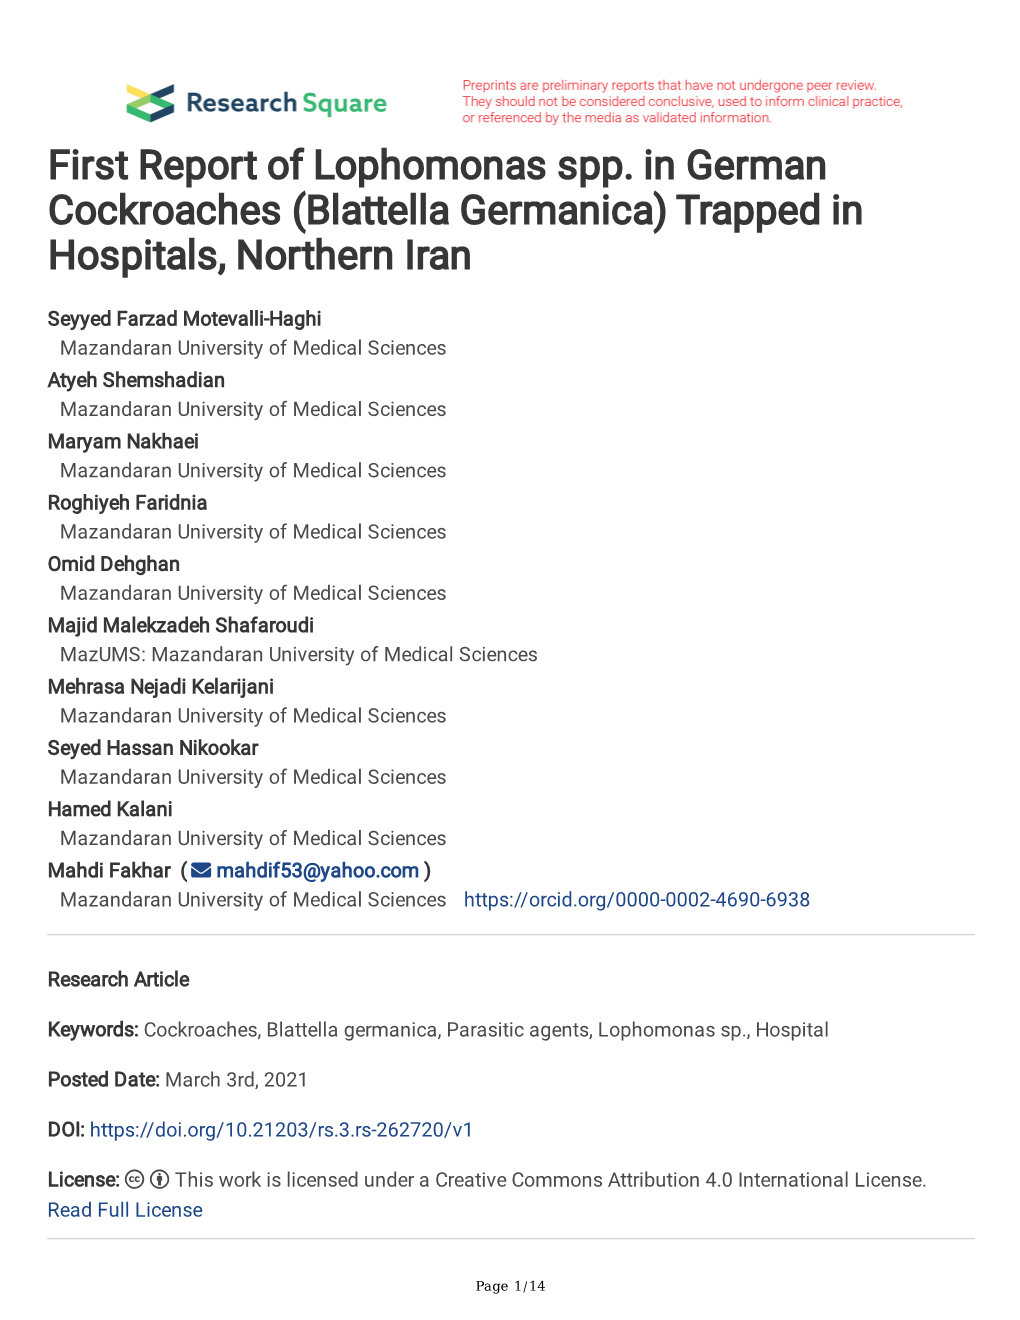 First Report of Lophomonas Spp. in German Cockroaches (Blattella Germanica) Trapped in Hospitals, Northern Iran